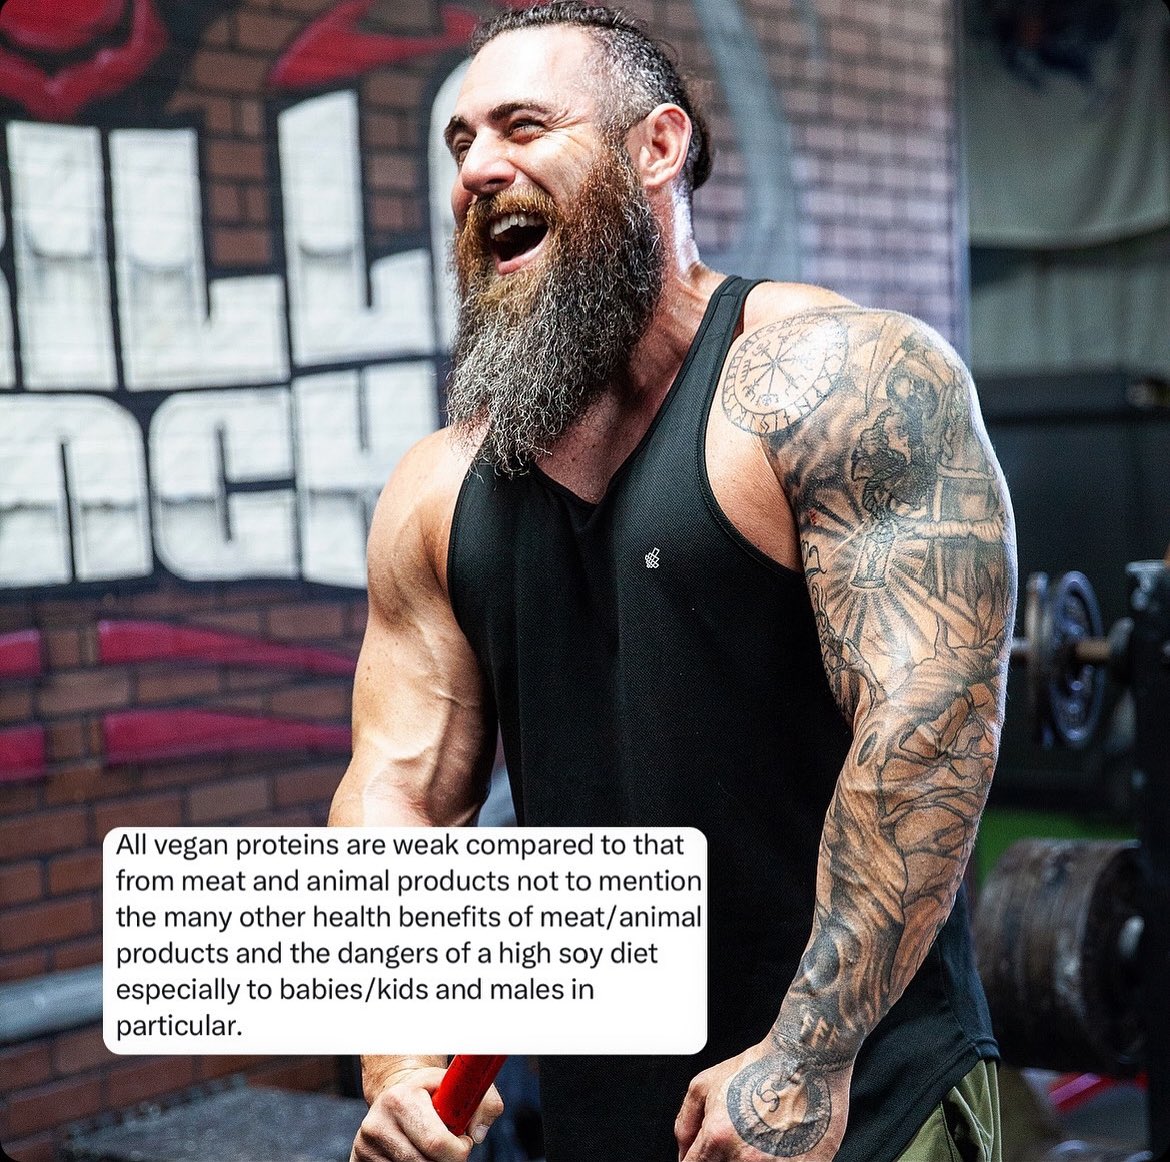 Your reaction when you know you're eating complete #vegan proteins with all the aminos necessary to build muscle. You can't help but laugh at the buffoonery😆🌱💪